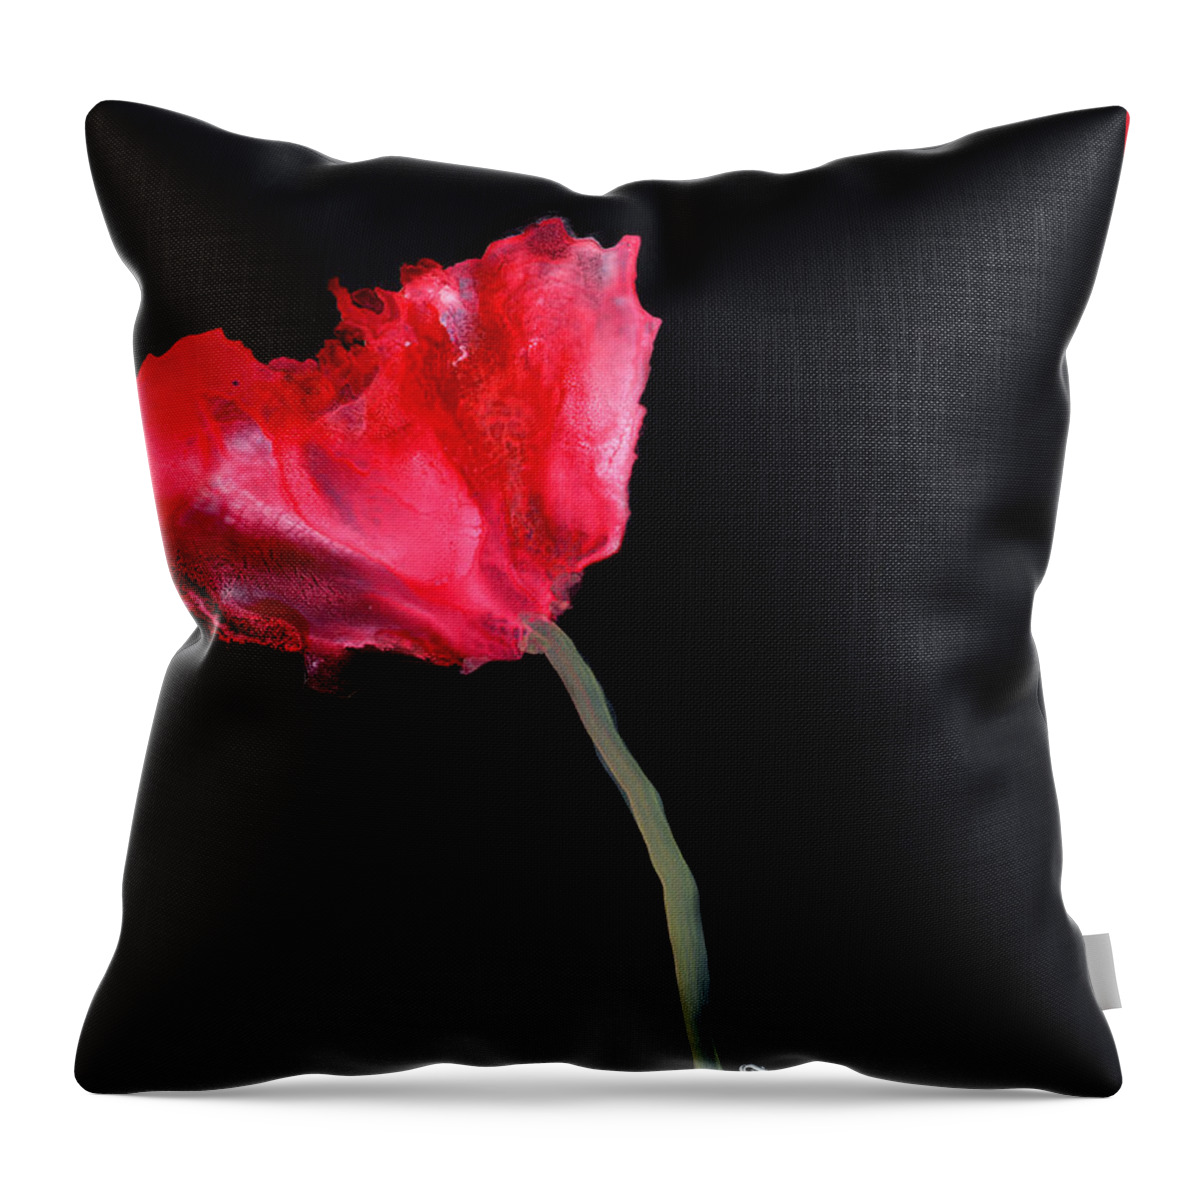 Red Poppy Throw Pillow featuring the painting Red Poppy by Charlene Fuhrman-Schulz